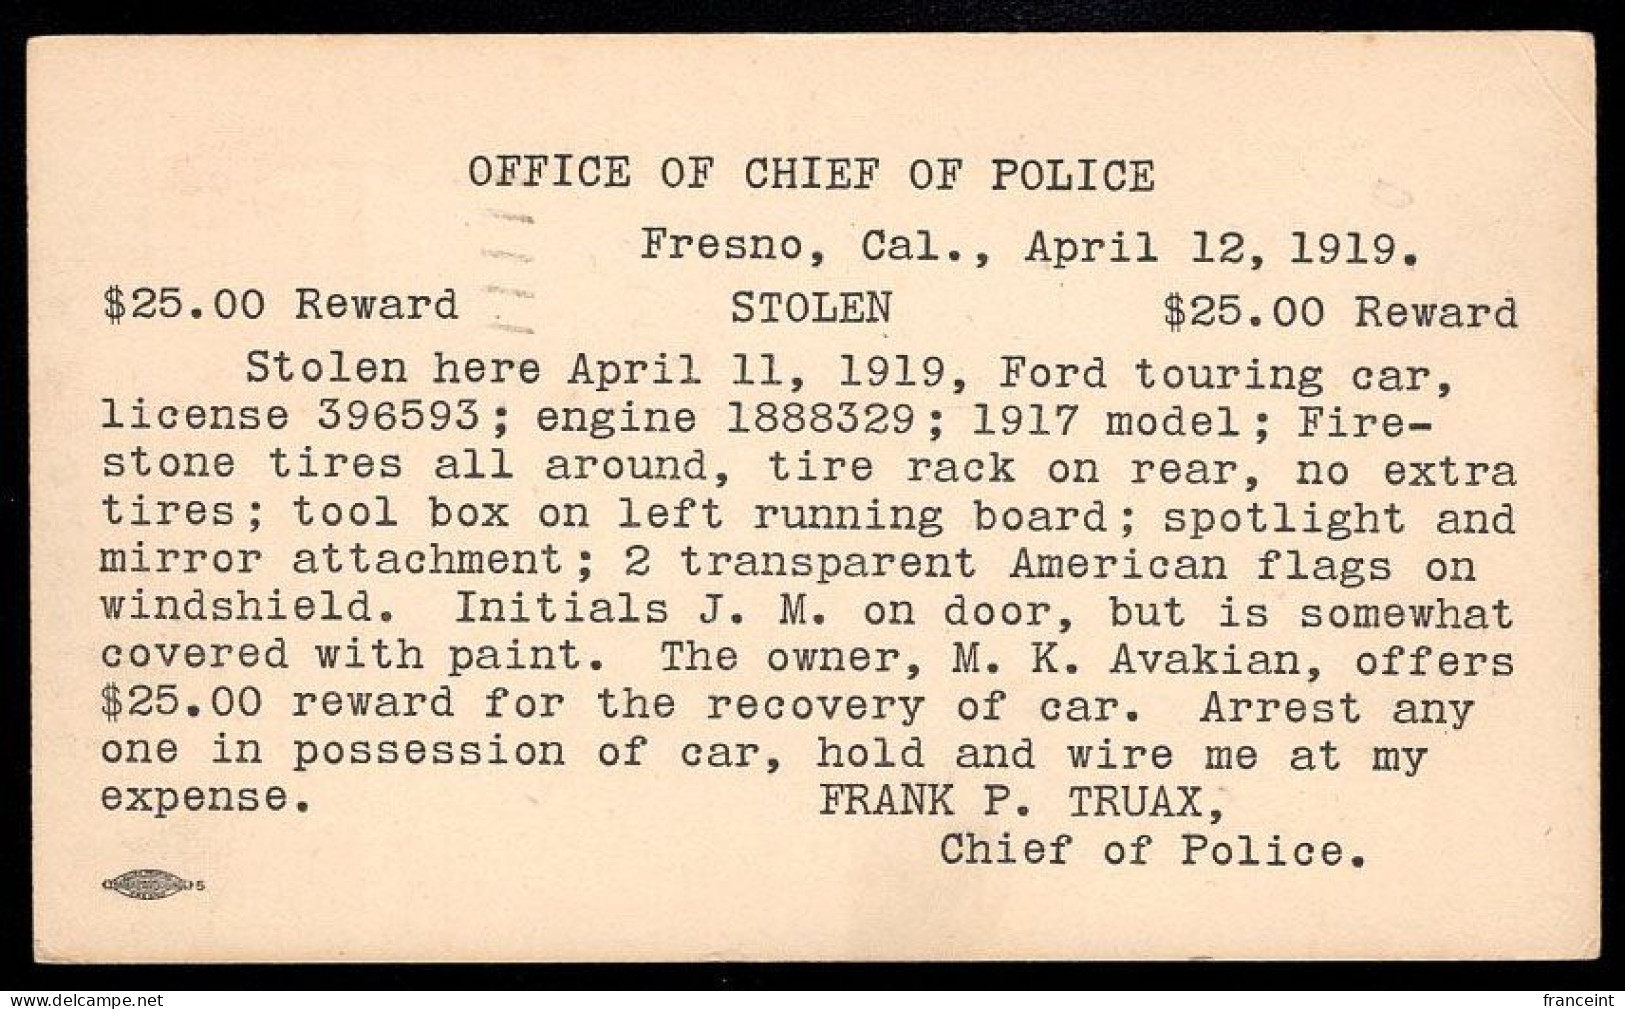 U.S.A.(1919) Auto Theft Reward Card. 2c Postal Card From Chief Of Police, Offering $25 Reward For Recovery Of 1917 Ford - Souvenirs & Special Cards